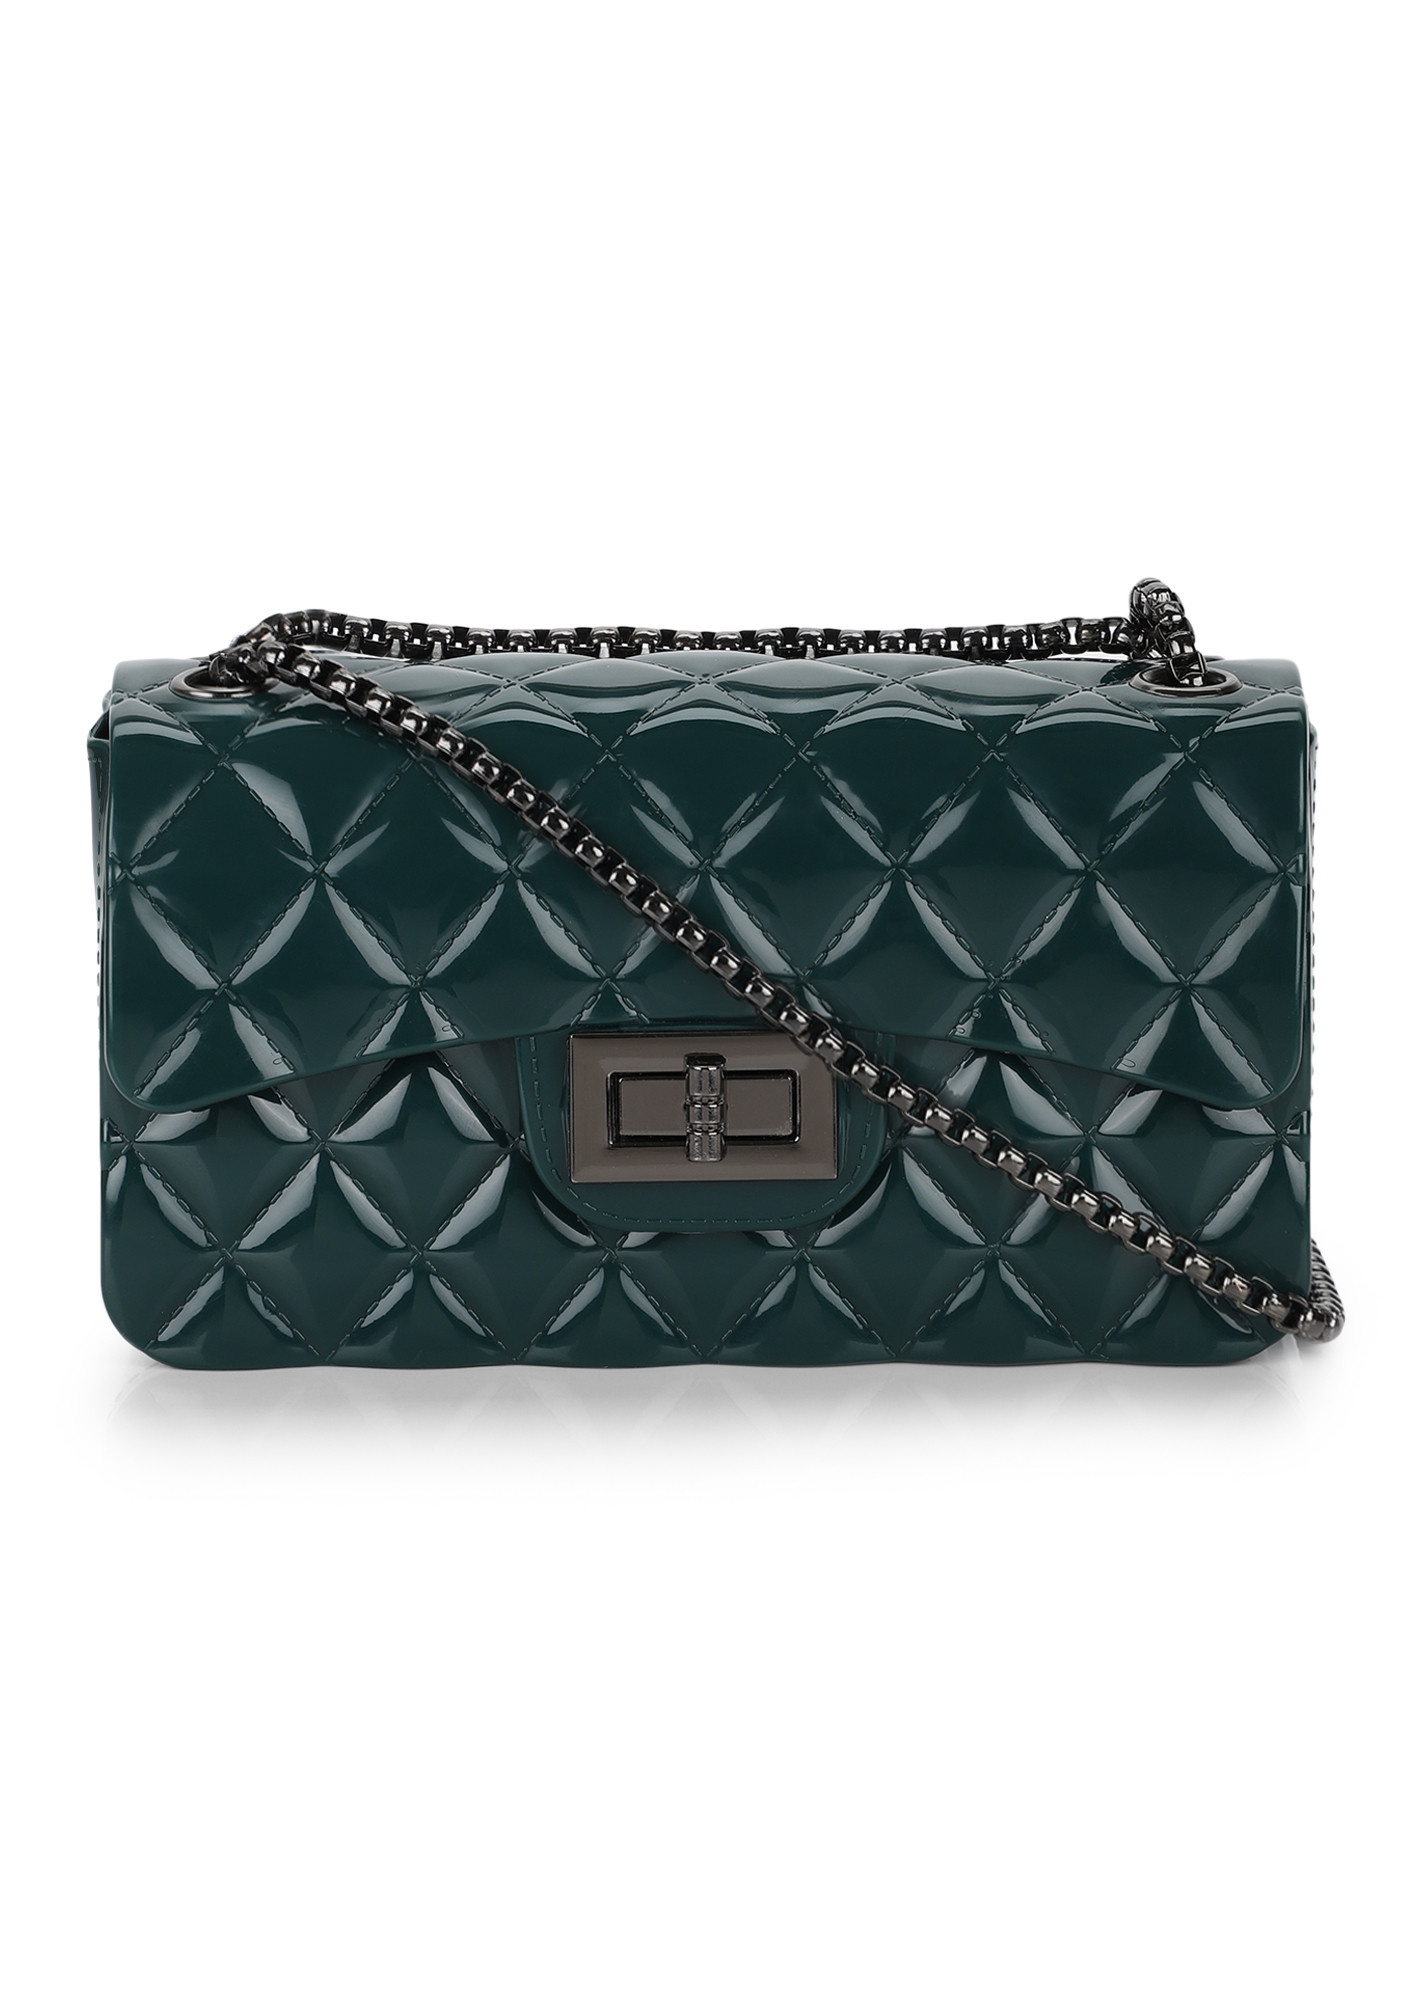 PARTY ON MY MIND DARK GREEN SLING BAG